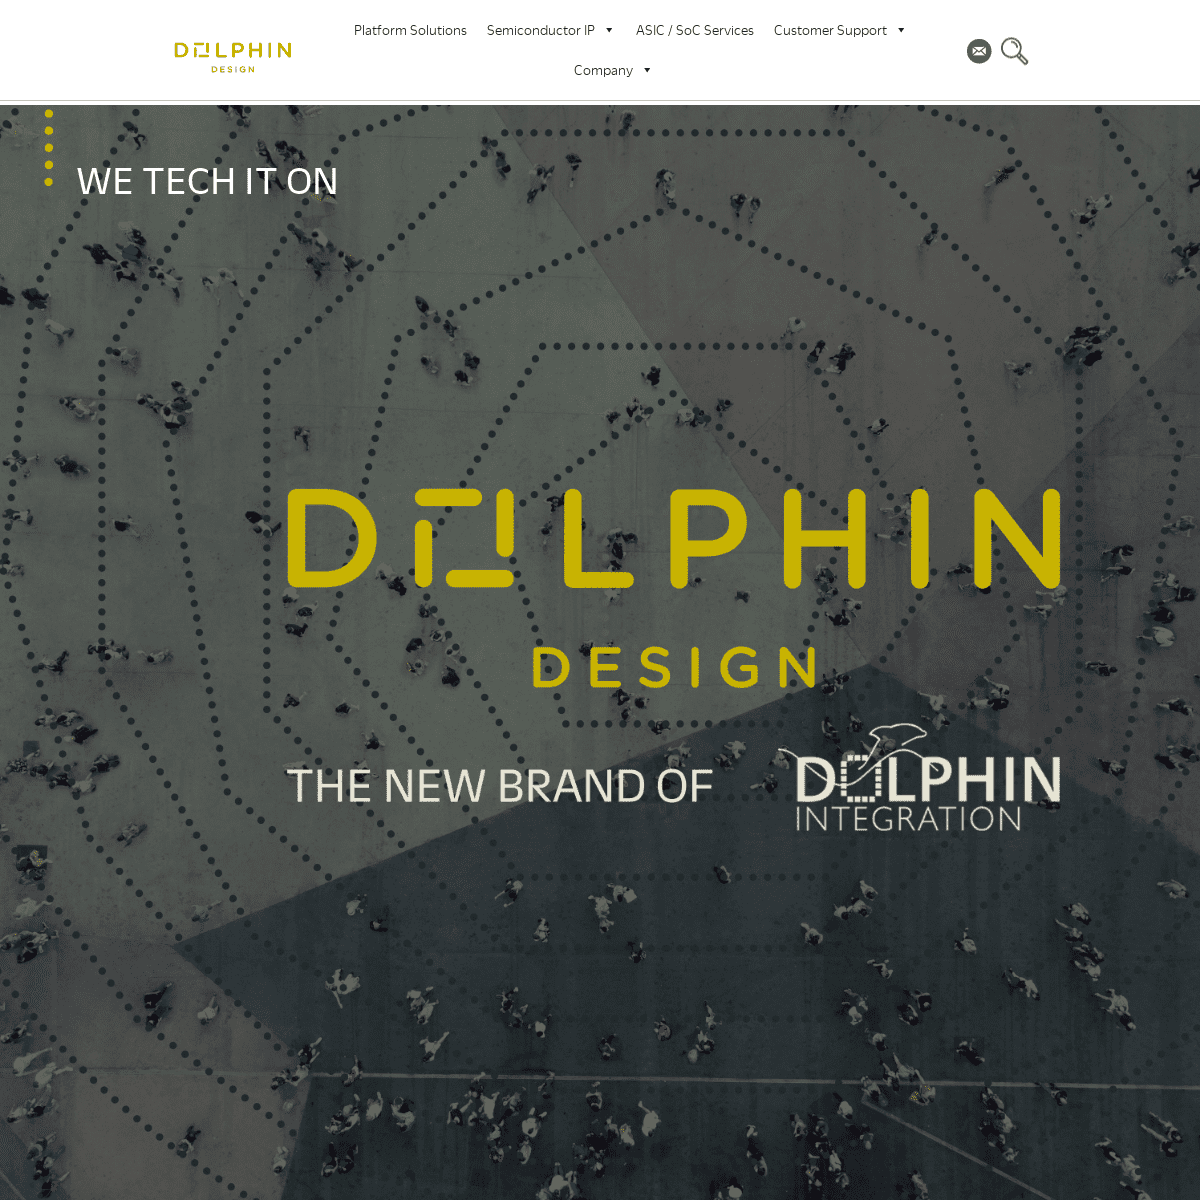 A complete backup of dolphin-integration.com